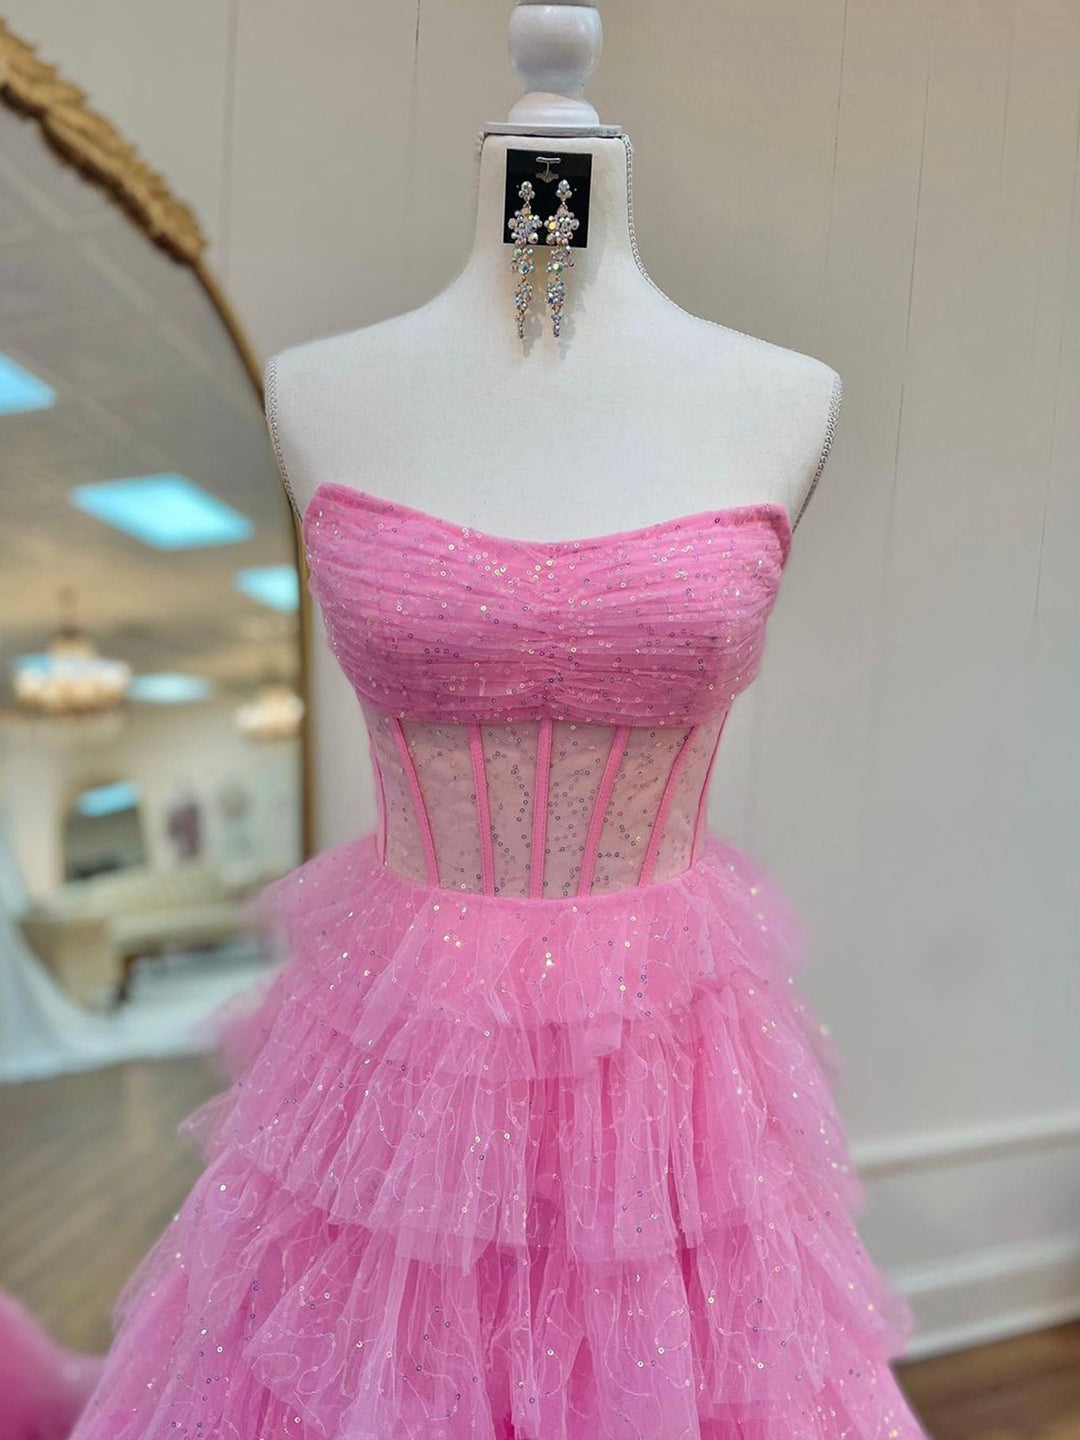 Aubriella |A Line Strapless Corset Glitter Tulle Prom Dress with Ruffles